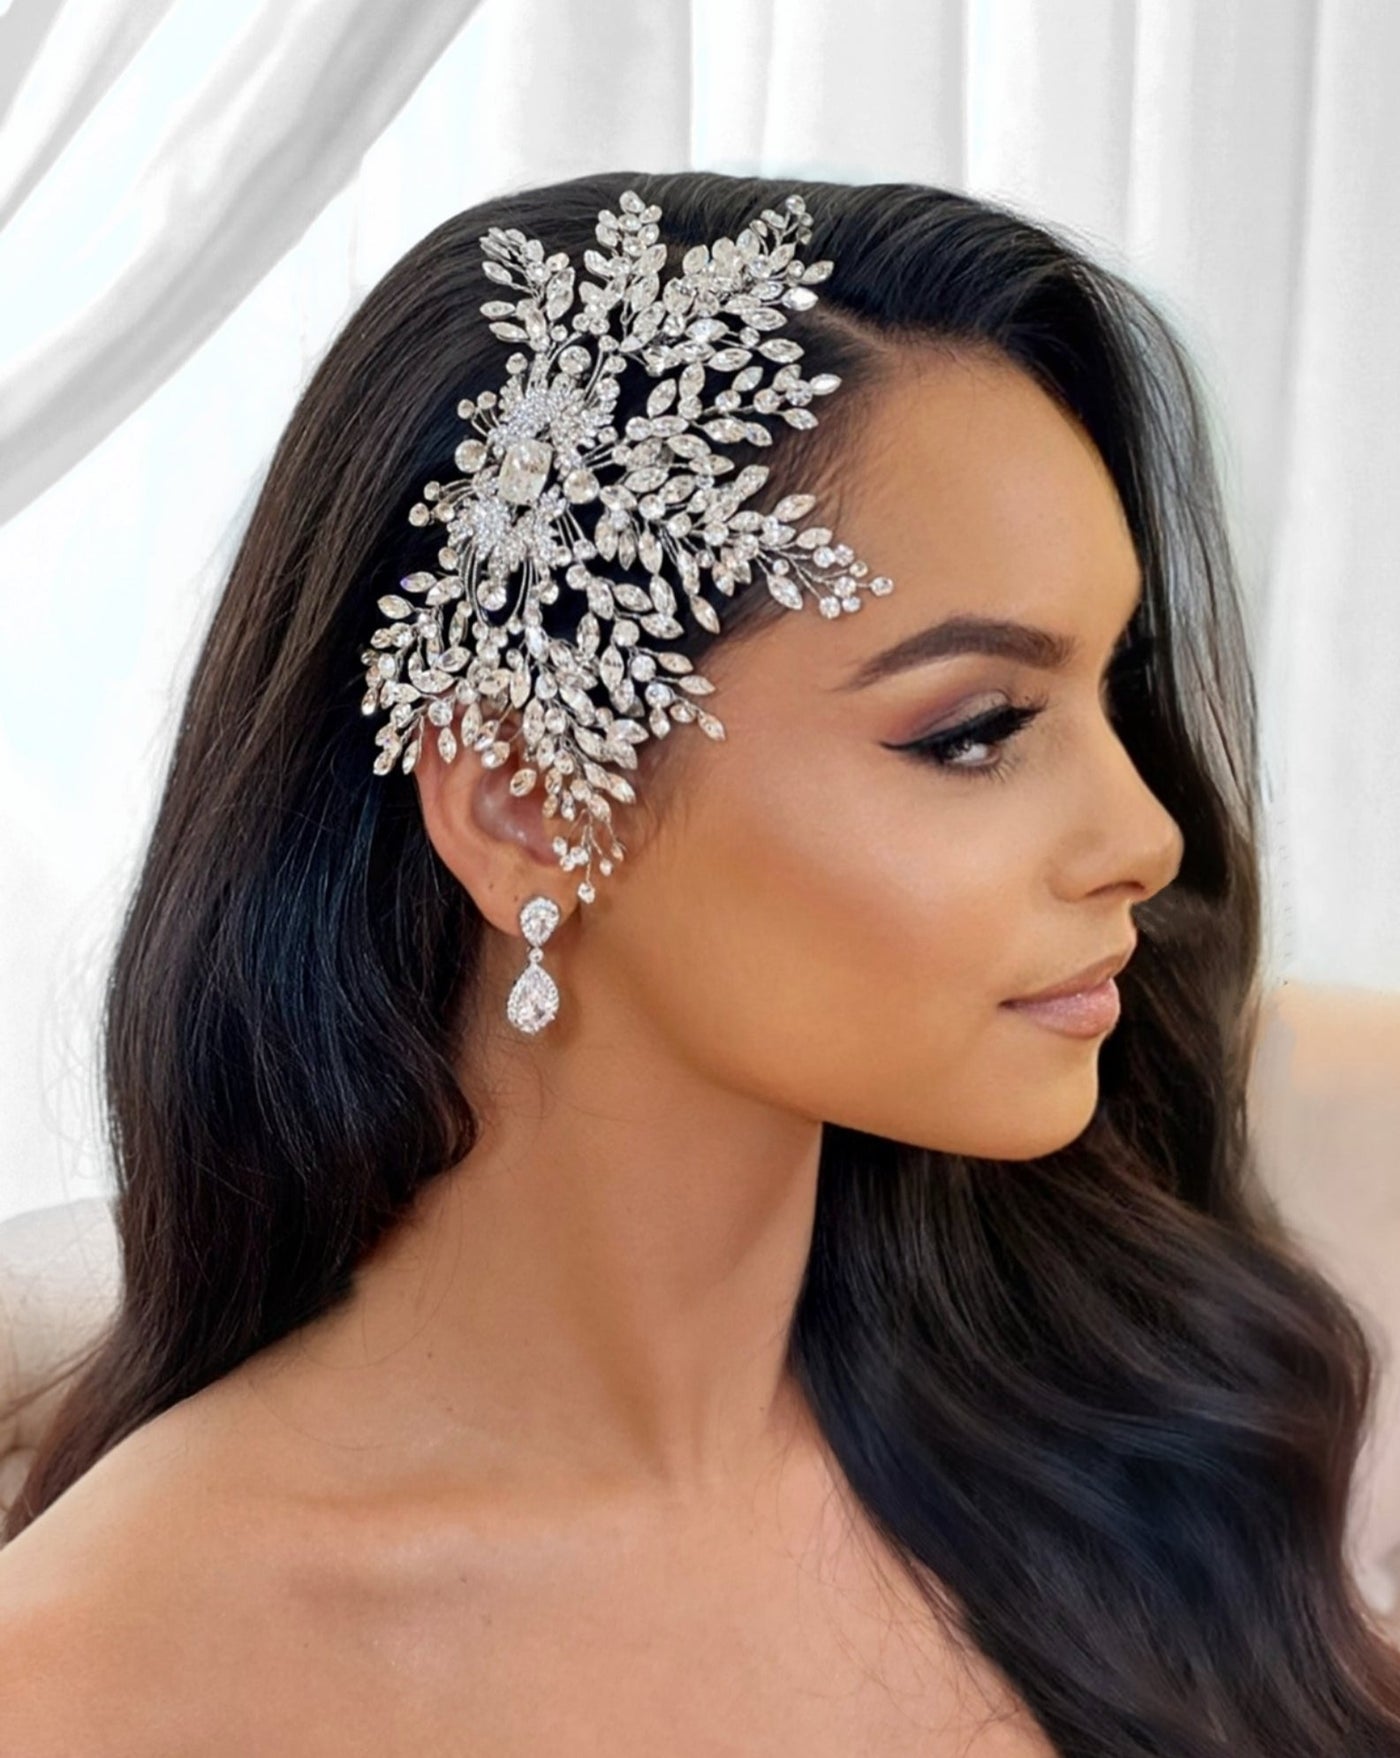 female model wearing bridal hair comb with one crystal at its center, surrounded by large sprays of crystals and silver detailing